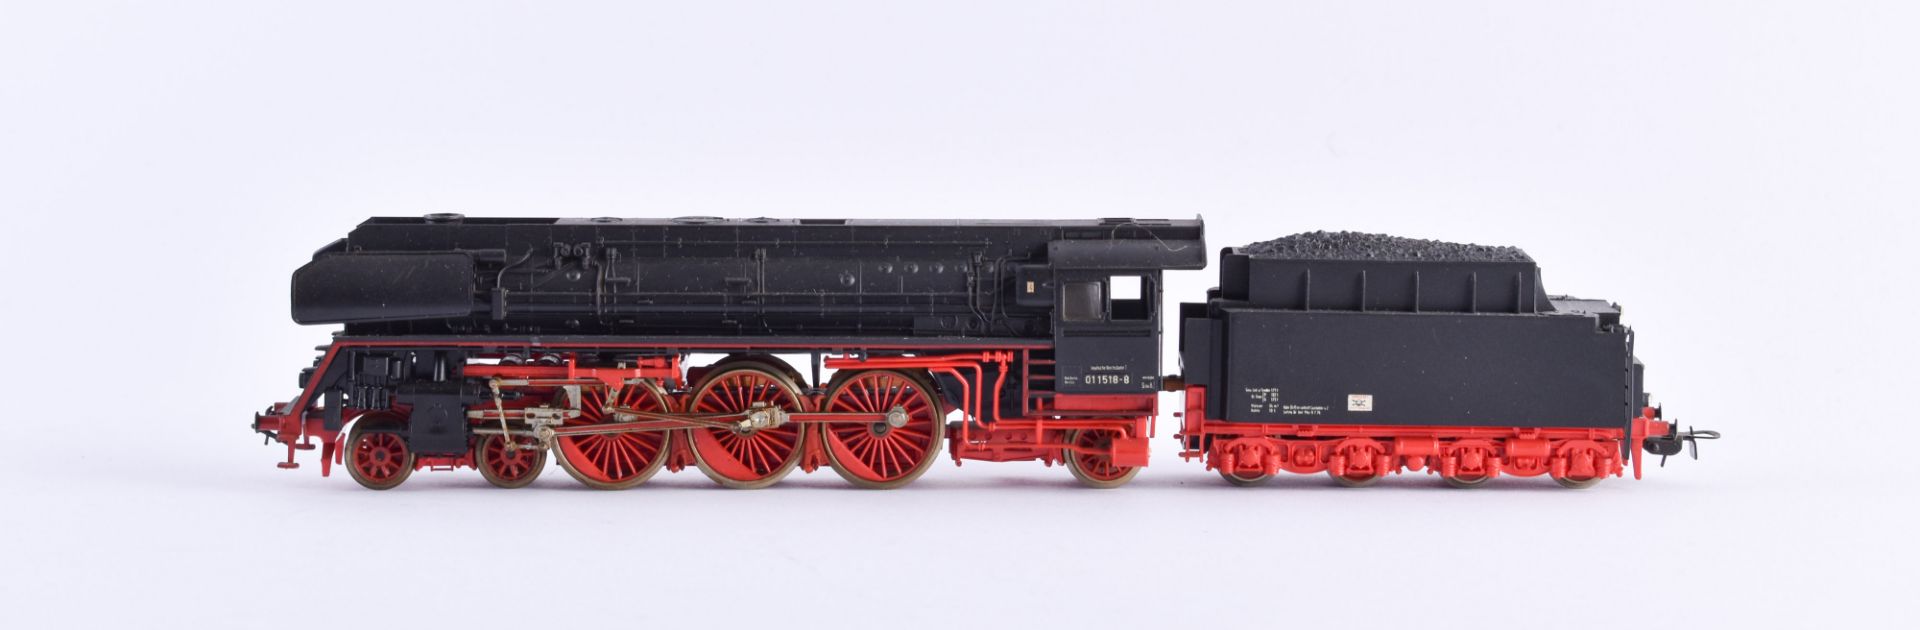 Steam locomotive with tender BR 01 1518-8 DR - Piko - Image 2 of 3